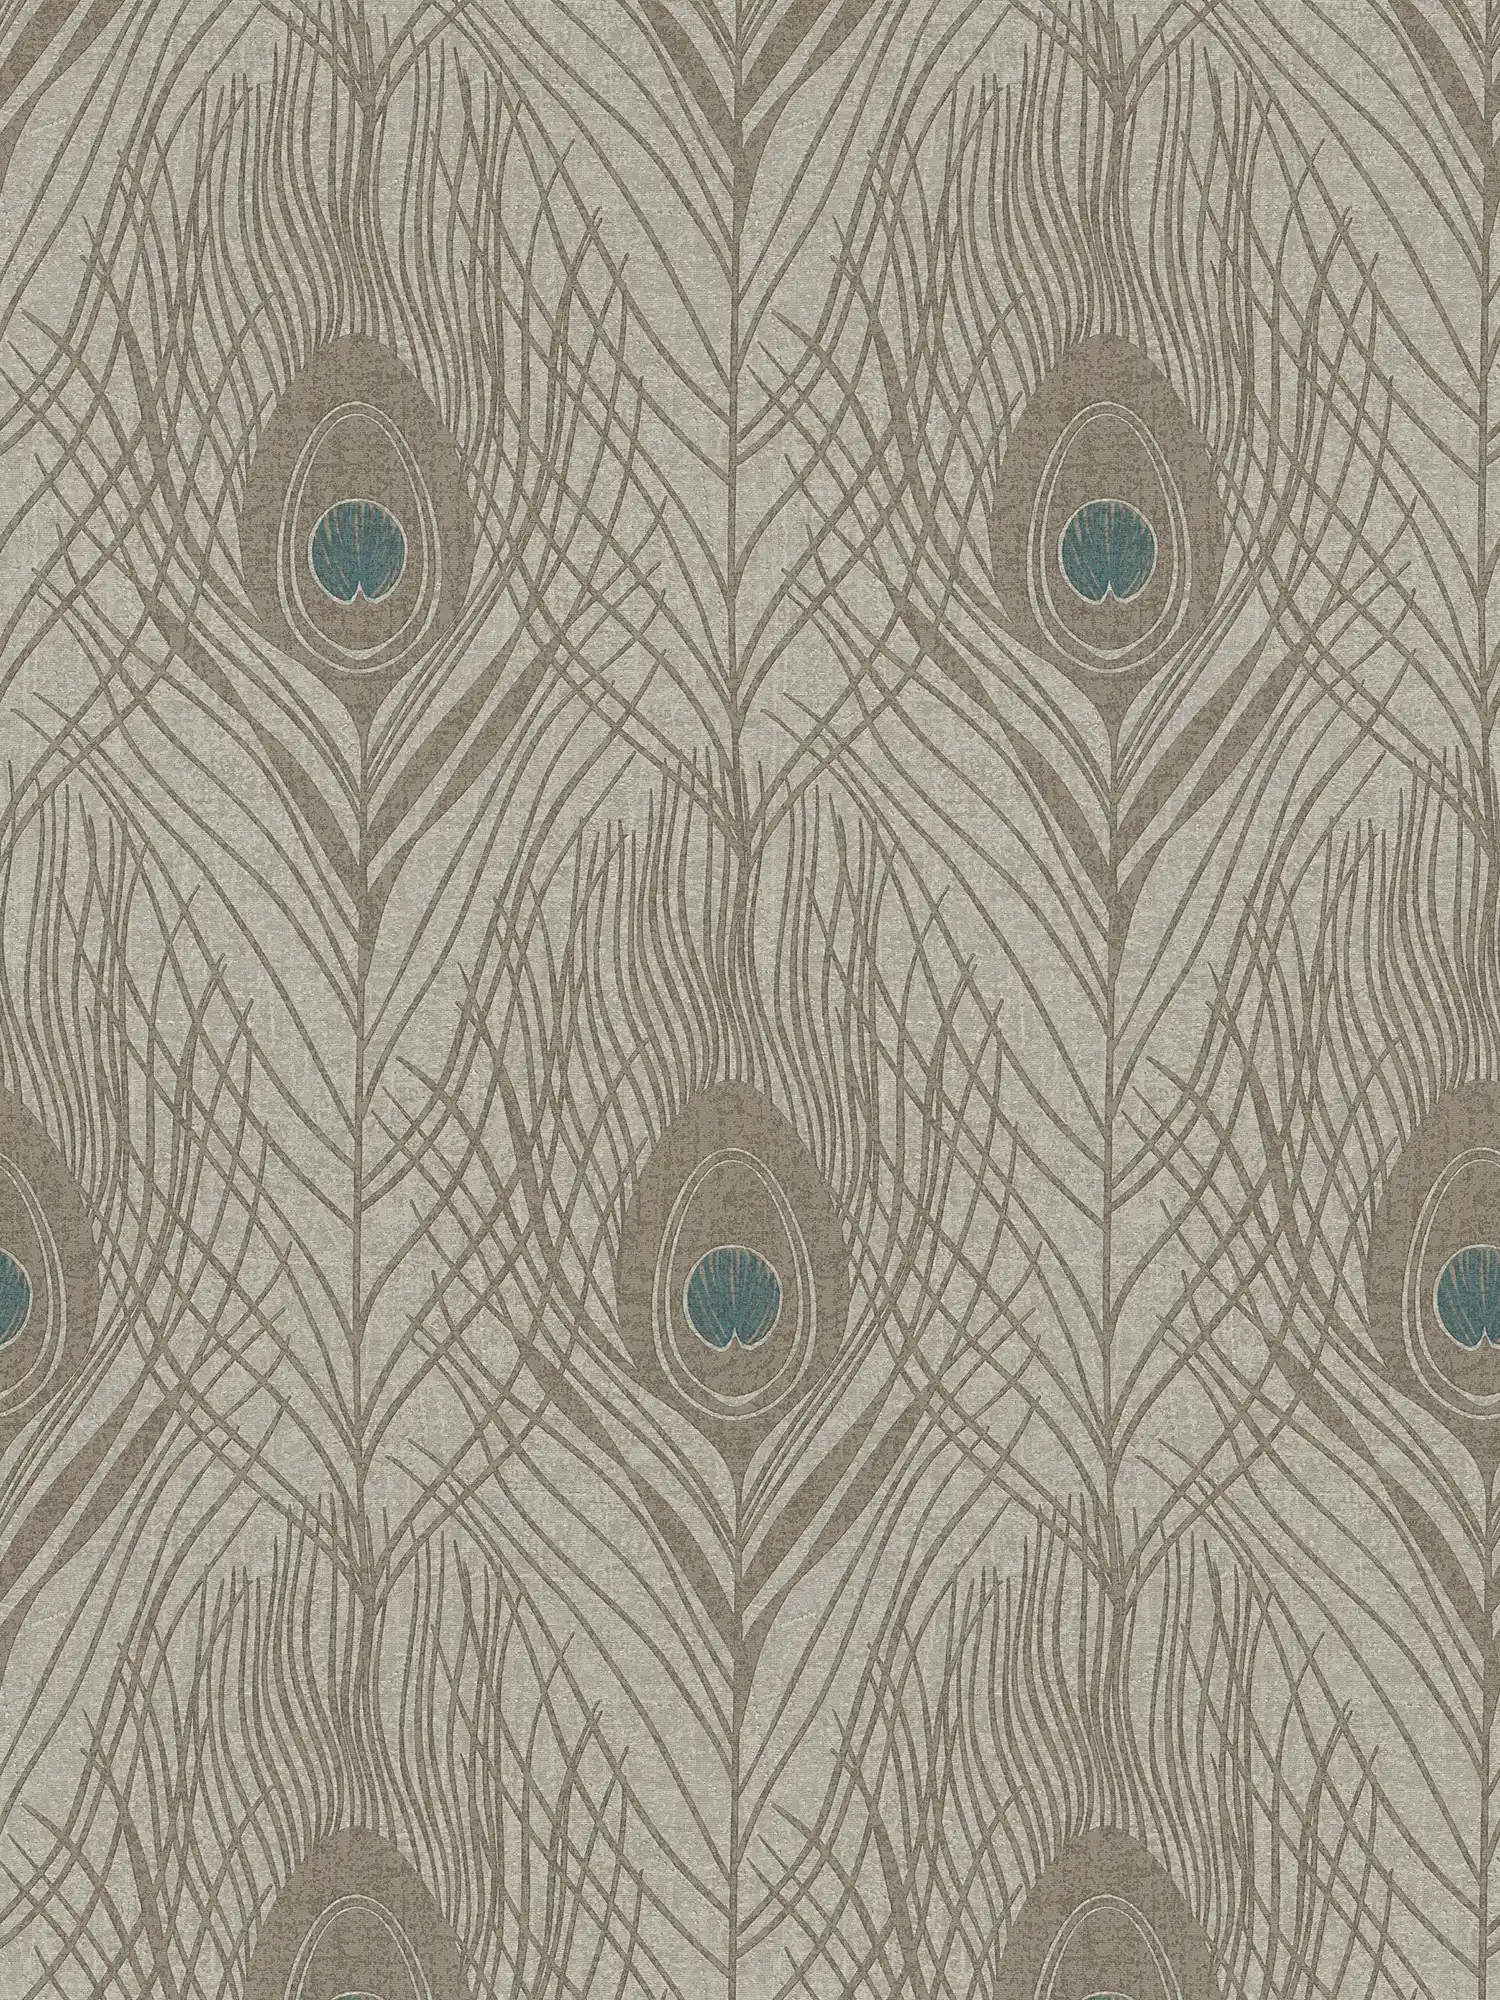 Brown non-woven wallpaper with peacock feathers, detailed - brown, grey, blue
